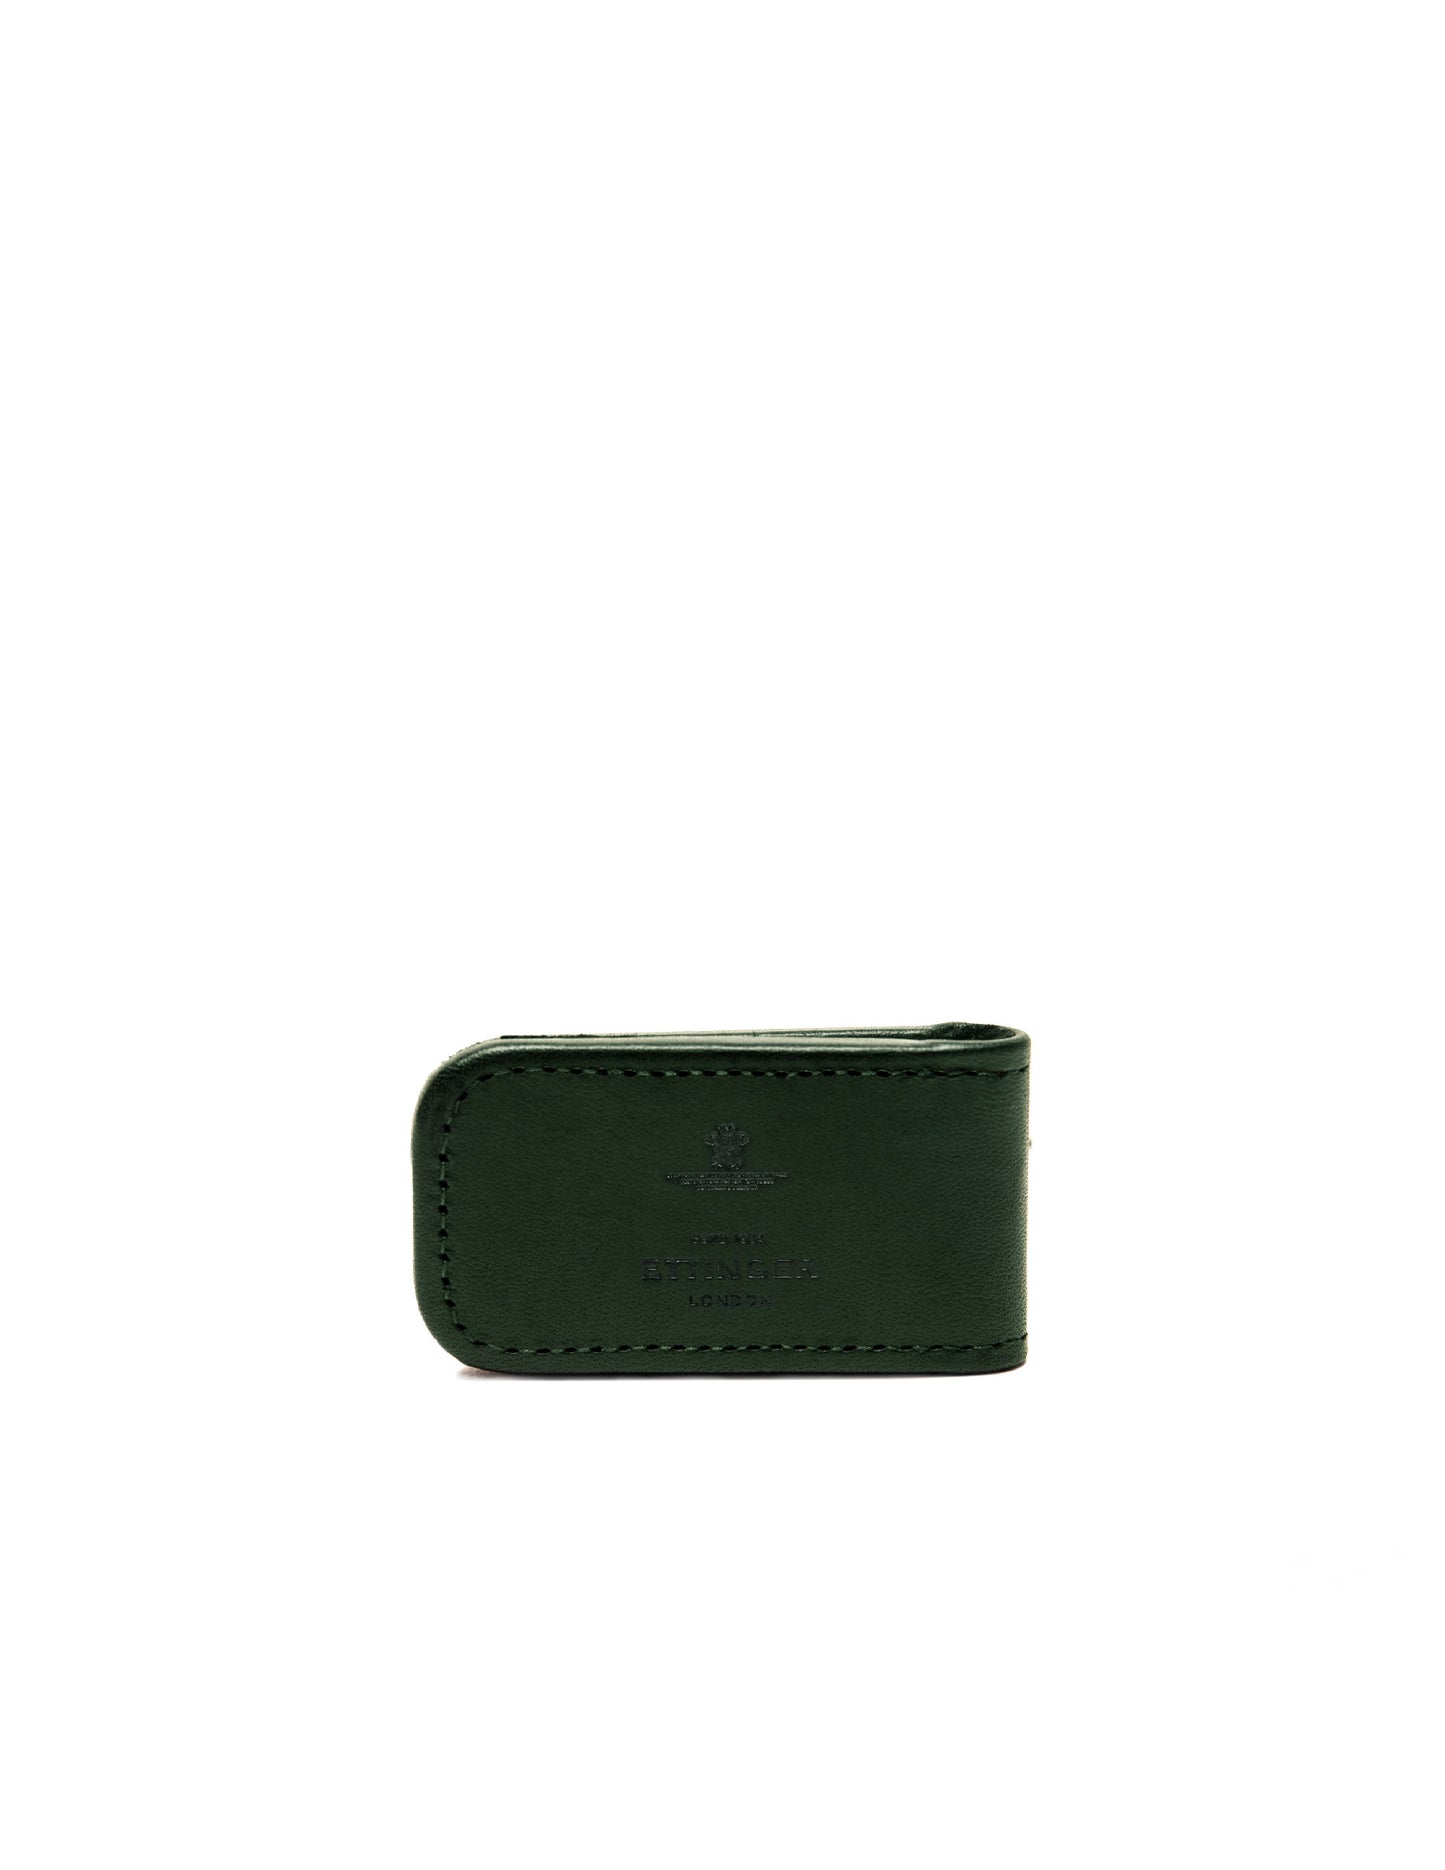 Magnetic Cash Clip in Green